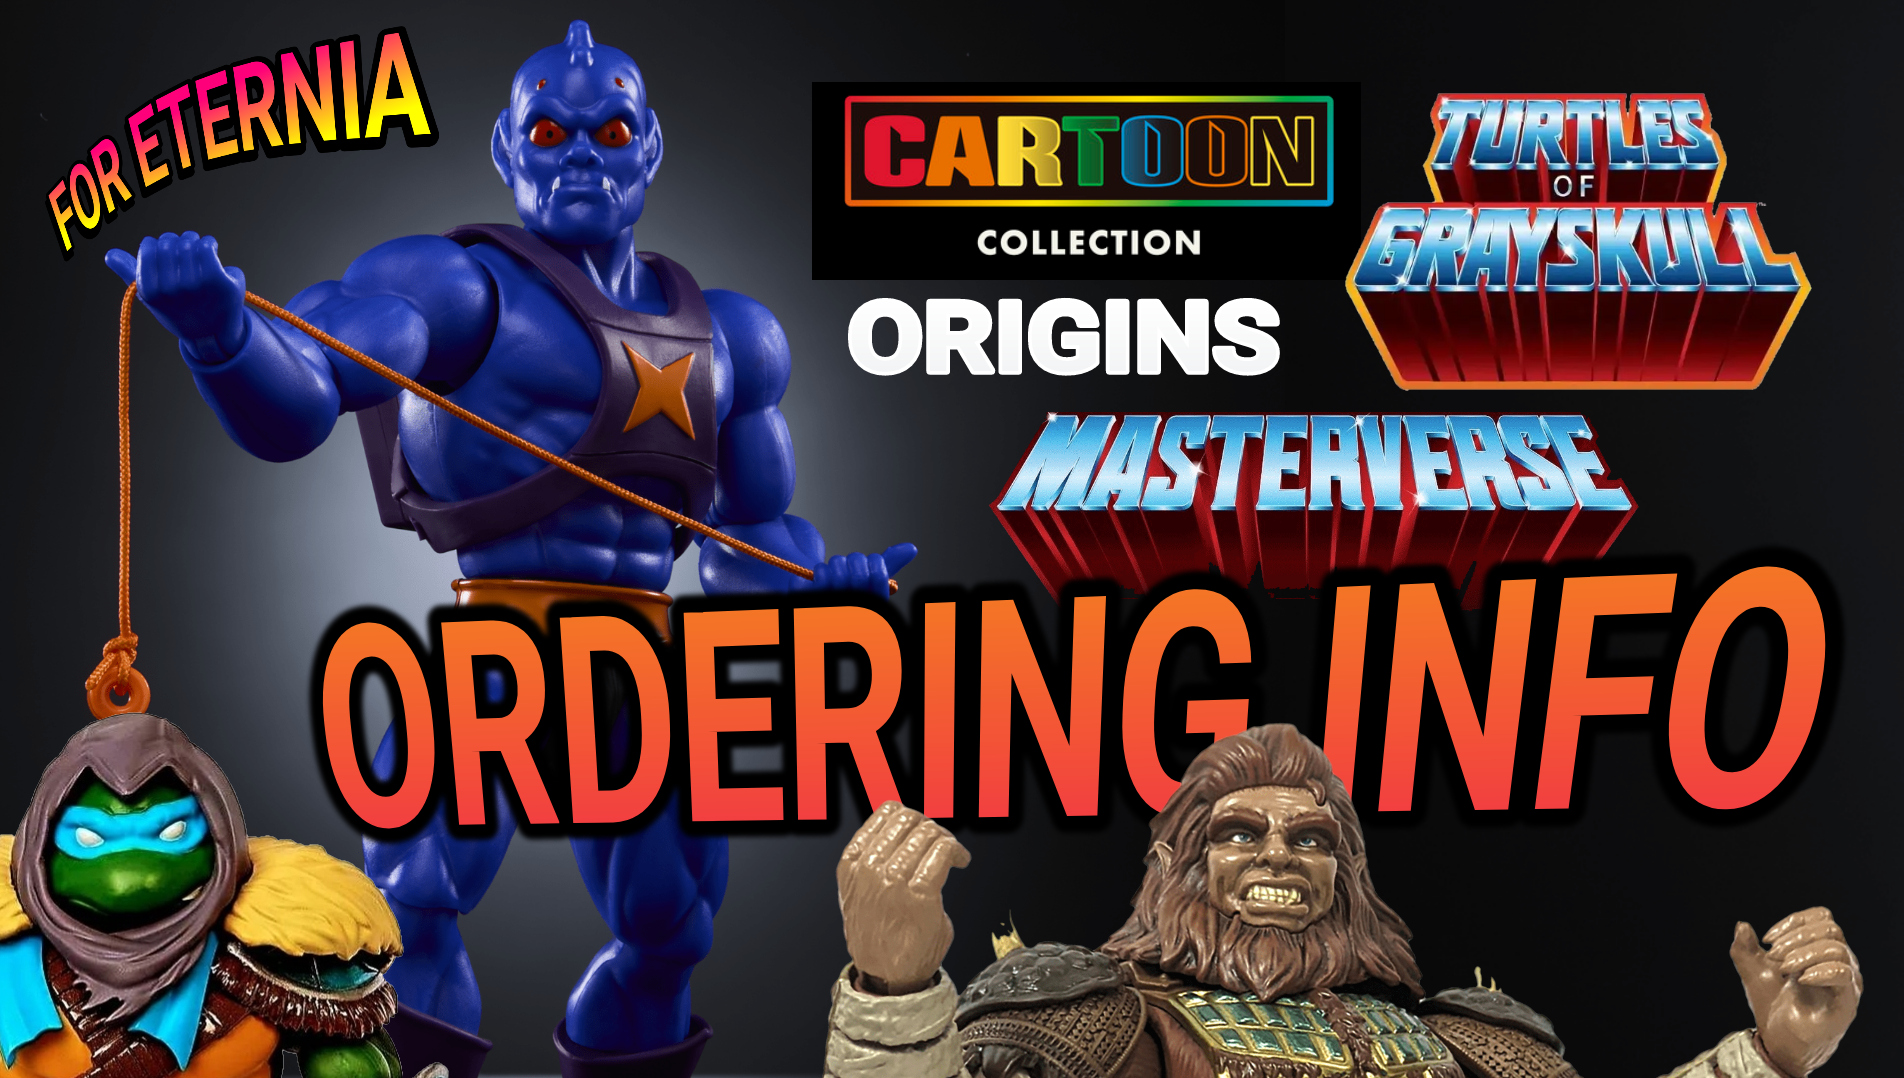 *UPDATE: Pre-Orders are Live!* ORDERING INFO for Today’s Masterverse and Origins action figure Fall Catalog